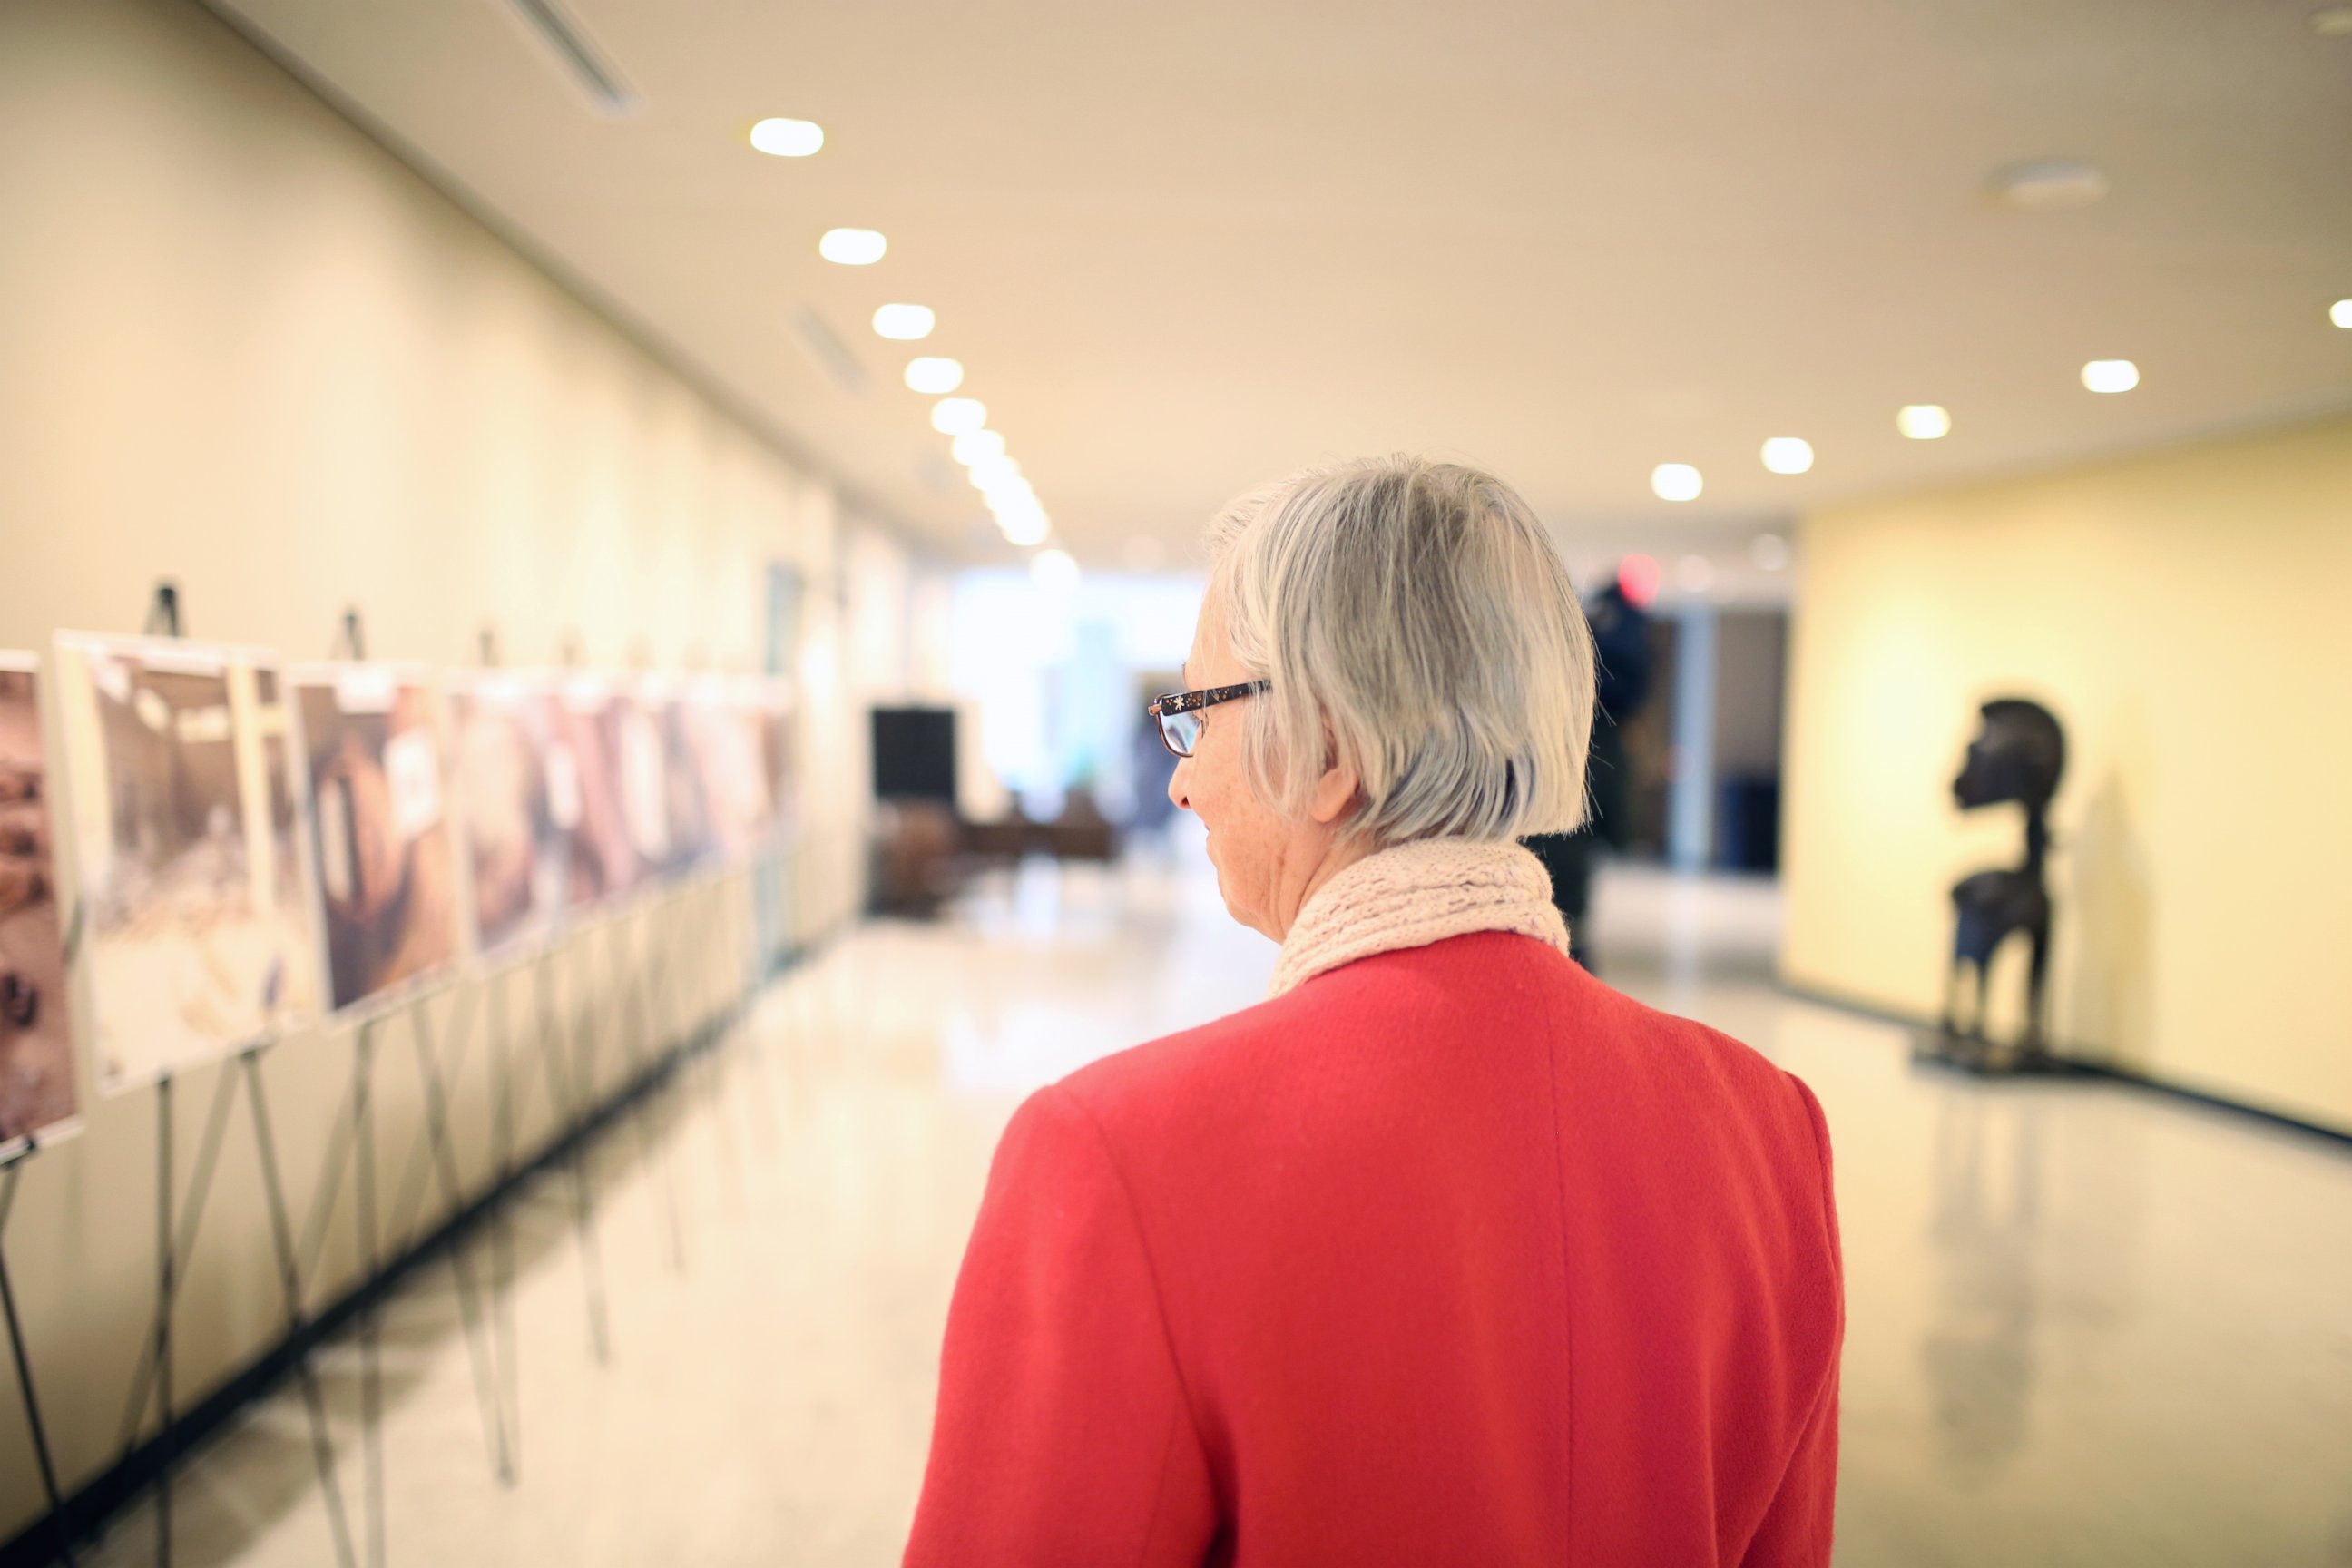 PHOTO: A viewer looks on at the "Caesar" photo exhibition at the United Nations Headquarters in New York, March 13, 2015.